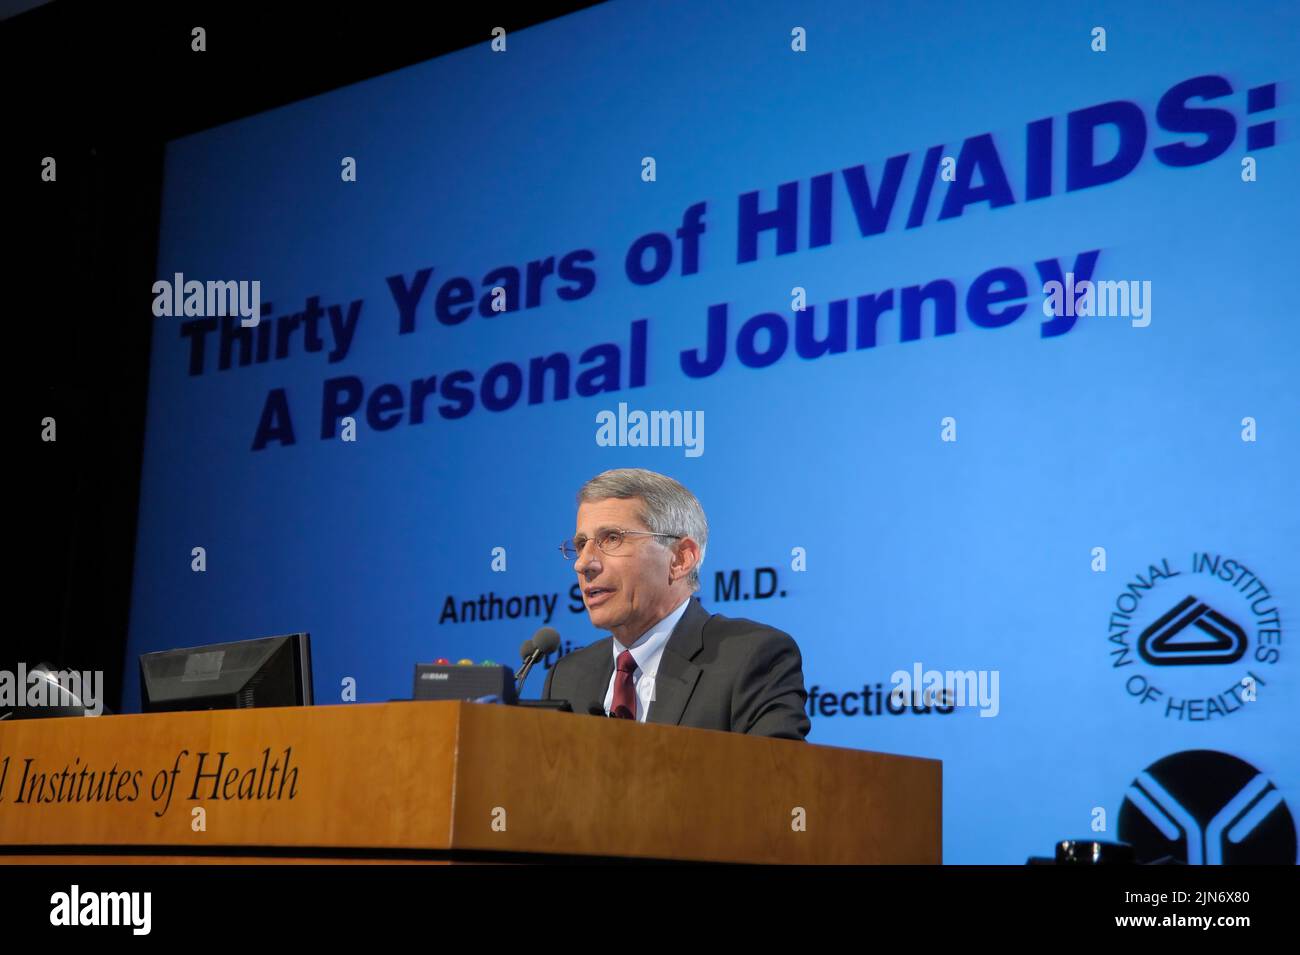 Dr. Anthony S. Fauci Talks About 30 Years of HIV/AIDS On May 31, 2011, NIAID Director Anthony S. Fauci, M.D. delivered a special lecture to commemorate the 30th anniversary of the first reported cases of what is now known as AIDS. Titled, “30 Years of HIV/AIDS: A Personal Journey,” the lecture took place in Masur Auditorium on the NIH campus in Bethesda, Maryland. During his talk, Dr. Fauci, who has been closely involved in the fight against HIV/AIDS since it began, described his personal experiences as a physician, leading HIV/AIDS researcher, and scientific administrator. Credit: NIAID Stock Photo